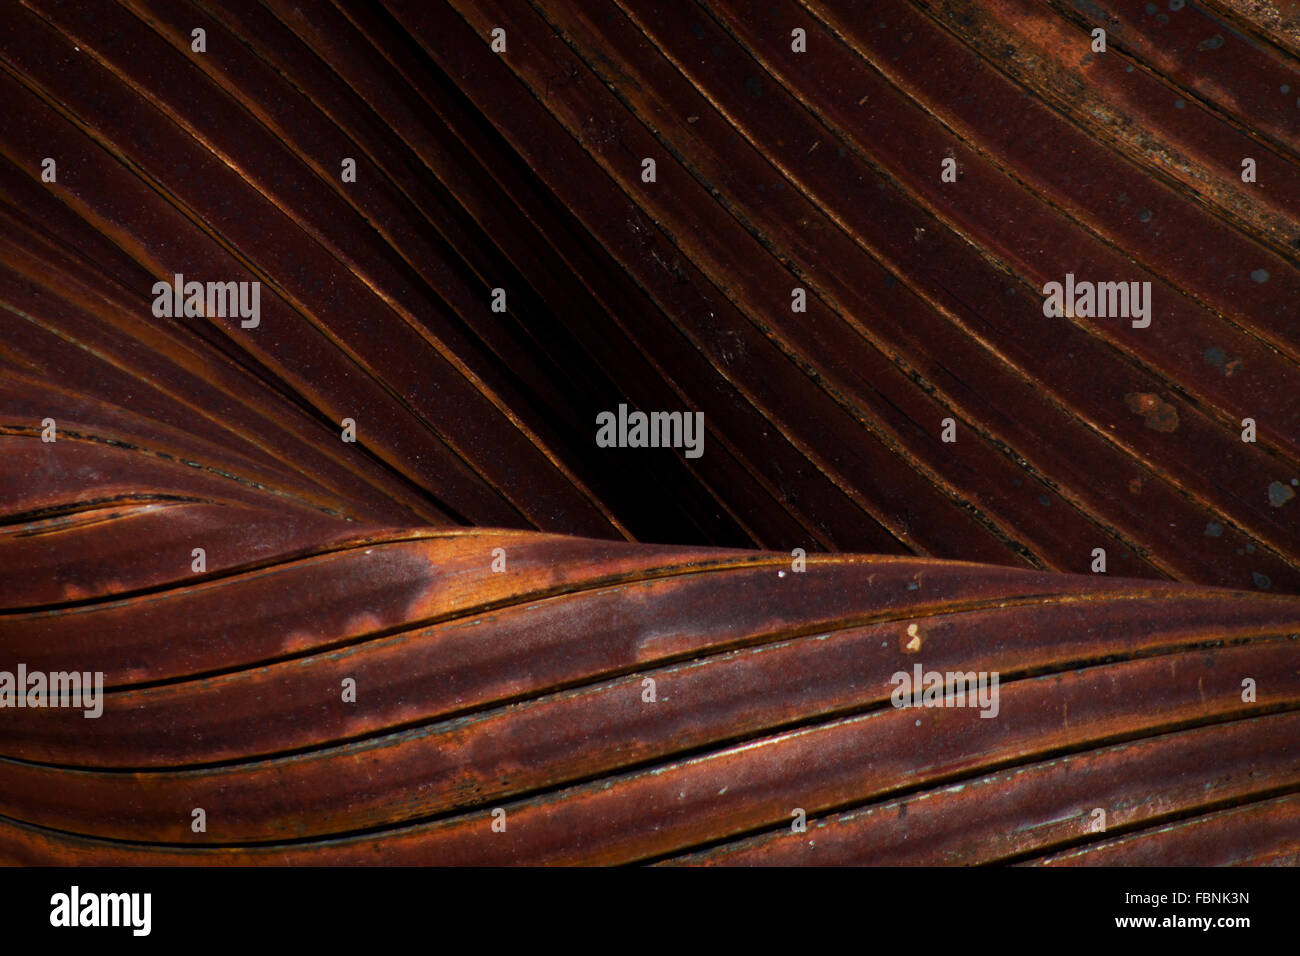 Part Of Wooden Construction Stock Photo